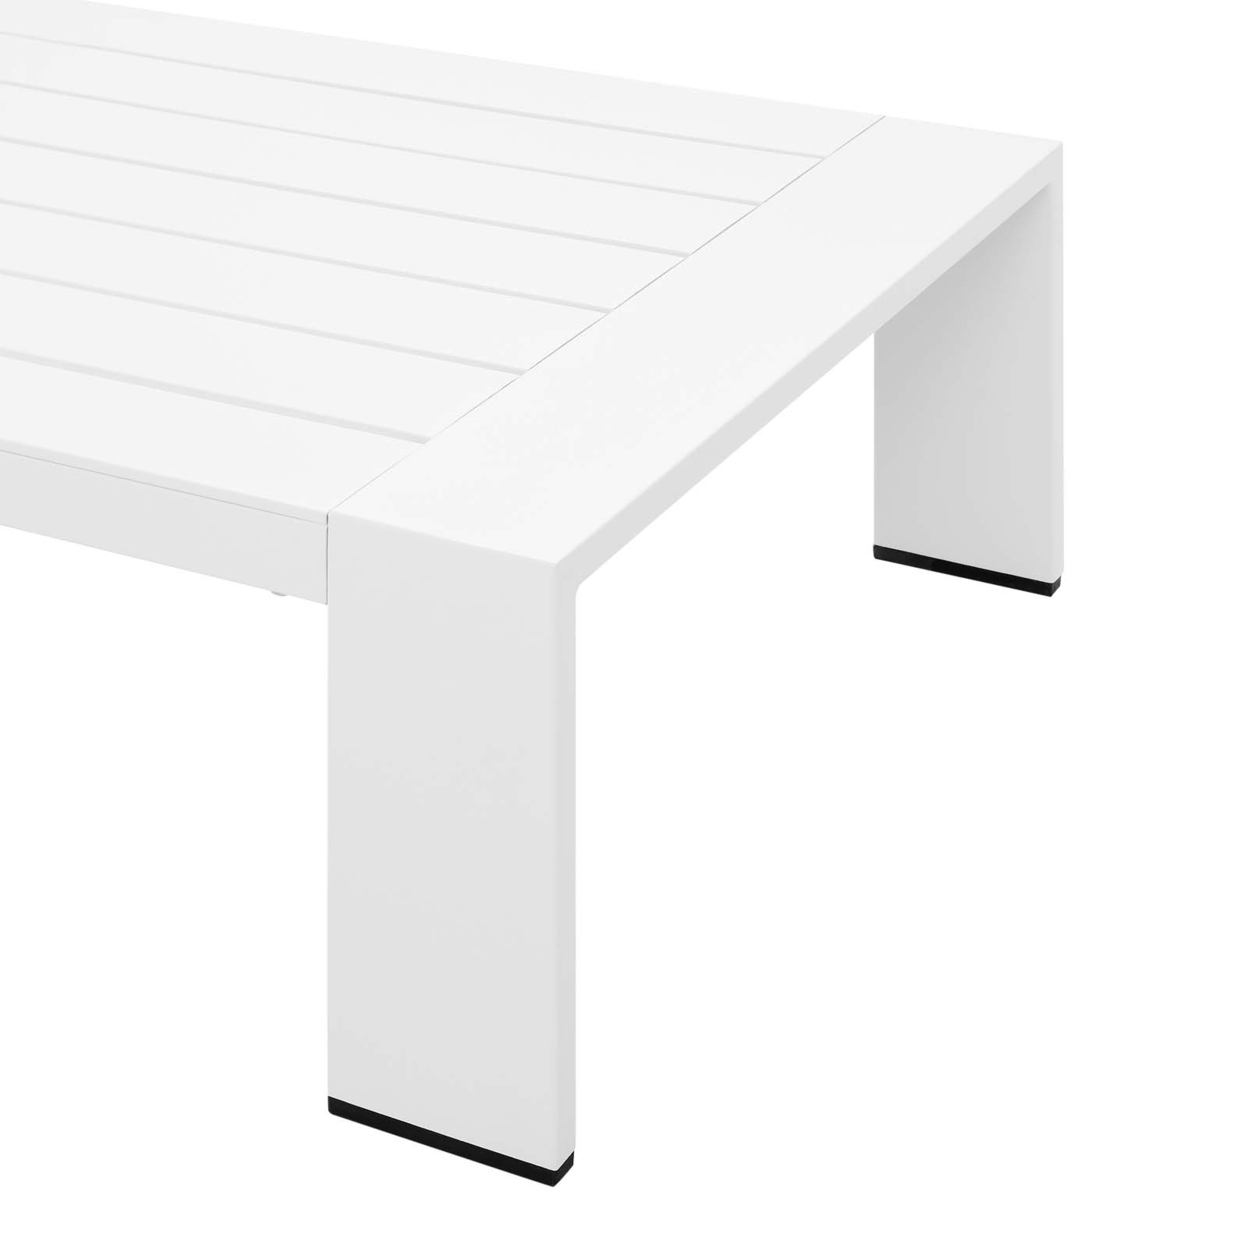 Tahoe Outdoor Patio Powder-Coated Aluminum Coffee Table, White